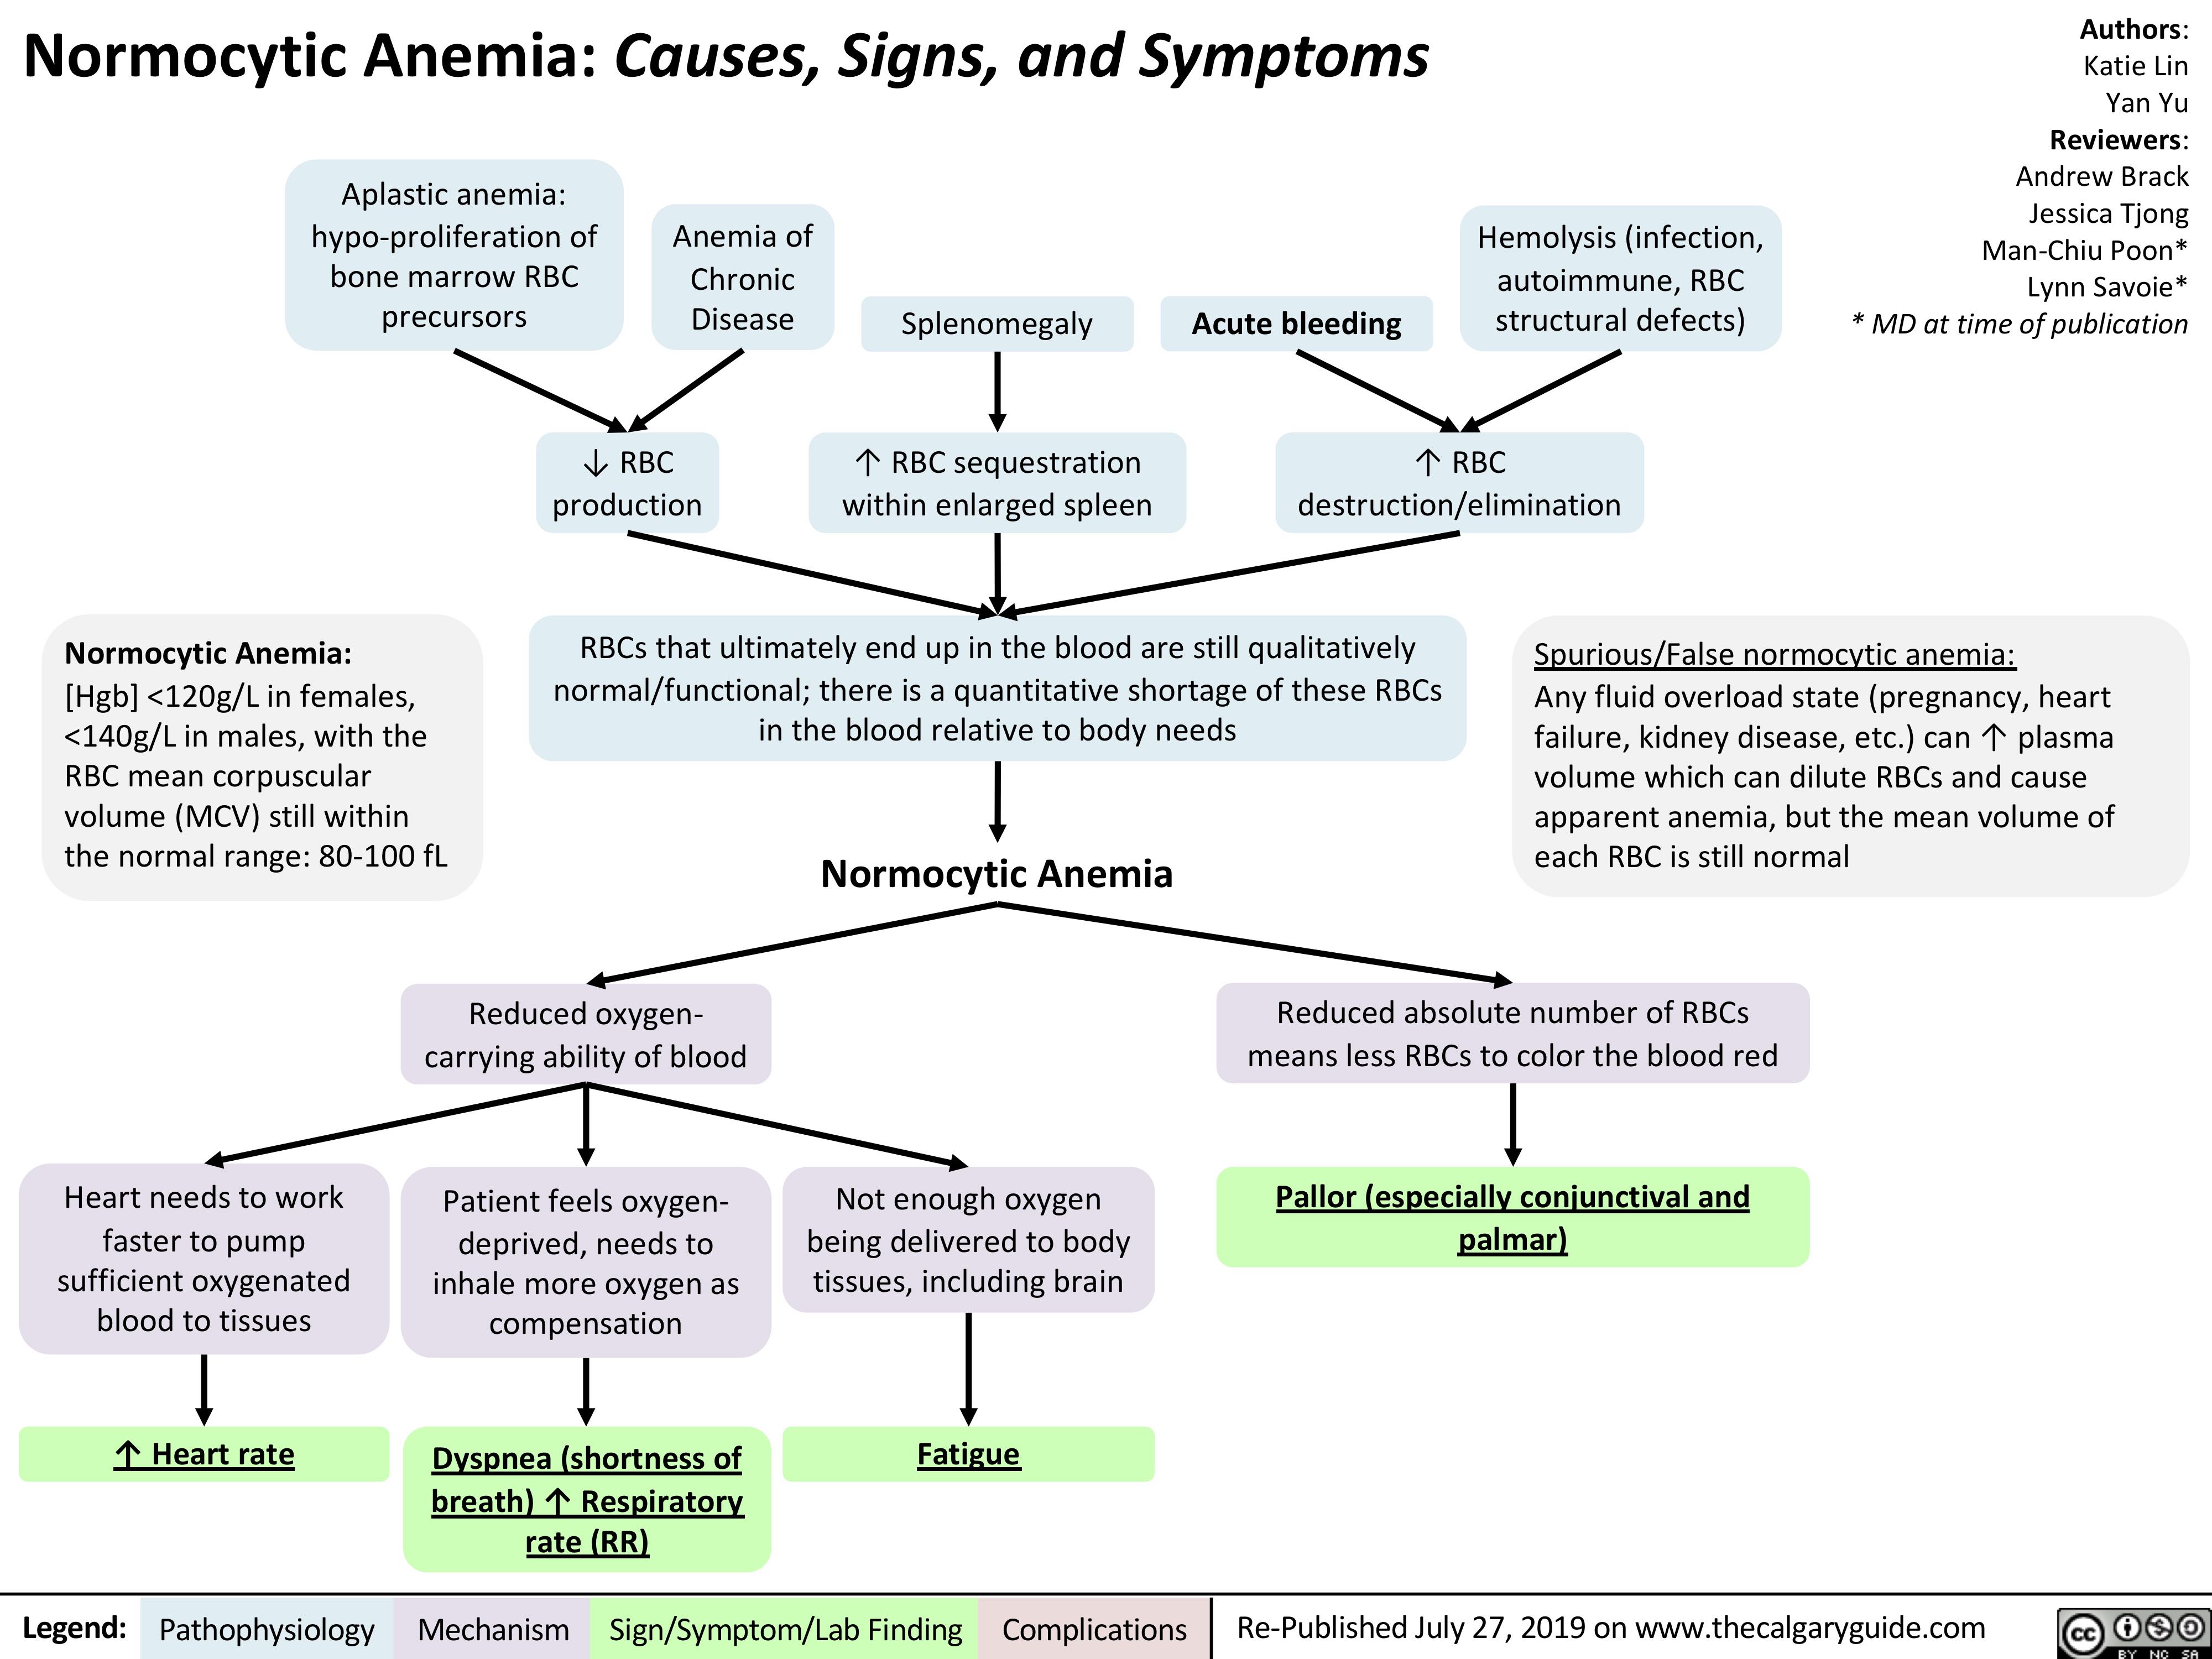 Normocytic Anemia: Causes, Signs, and Symptoms
Authors: Katie Lin Yan Yu Reviewers: Andrew Brack Jessica Tjong Man-Chiu Poon* Lynn Savoie* * MD at time of publication
 Aplastic anemia: hypo-proliferation of bone marrow RBC precursors
Anemia of Chronic Disease
Splenomegaly
↑ RBC sequestration within enlarged spleen
Acute bleeding
Hemolysis (infection, autoimmune, RBC structural defects)
            ↓ RBC production
↑ RBC destruction/elimination
    Normocytic Anemia:
[Hgb] <120g/L in females, <140g/L in males, with the RBC mean corpuscular volume (MCV) still within the normal range: 80-100 fL
RBCs that ultimately end up in the blood are still qualitatively normal/functional; there is a quantitative shortage of these RBCs in the blood relative to body needs
Spurious/False normocytic anemia:
Any fluid overload state (pregnancy, heart failure, kidney disease, etc.) can ↑ plasma volume which can dilute RBCs and cause apparent anemia, but the mean volume of each RBC is still normal
  Normocytic Anemia
            Heart needs to work faster to pump
sufficient oxygenated blood to tissues
↑ Heart rate
Reduced oxygen- carrying ability of blood
Patient feels oxygen- deprived, needs to inhale more oxygen as compensation
Dyspnea (shortness of breath) ↑ Respiratory rate (RR)
Not enough oxygen being delivered to body tissues, including brain
Fatigue
Reduced absolute number of RBCs means less RBCs to color the blood red
Pallor (especially conjunctival and palmar)
            Legend:
 Pathophysiology
 Mechanism
Sign/Symptom/Lab Finding
  Complications
Re-Published July 27, 2019 on www.thecalgaryguide.com
   